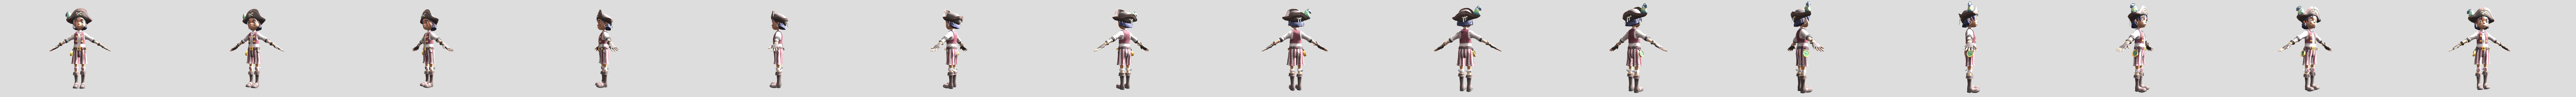 Maritza Esposito Pirate From Secret Neighbor - Download Free 3D model by  Harlie/Kaeul (@harleymh) [8a50be5]